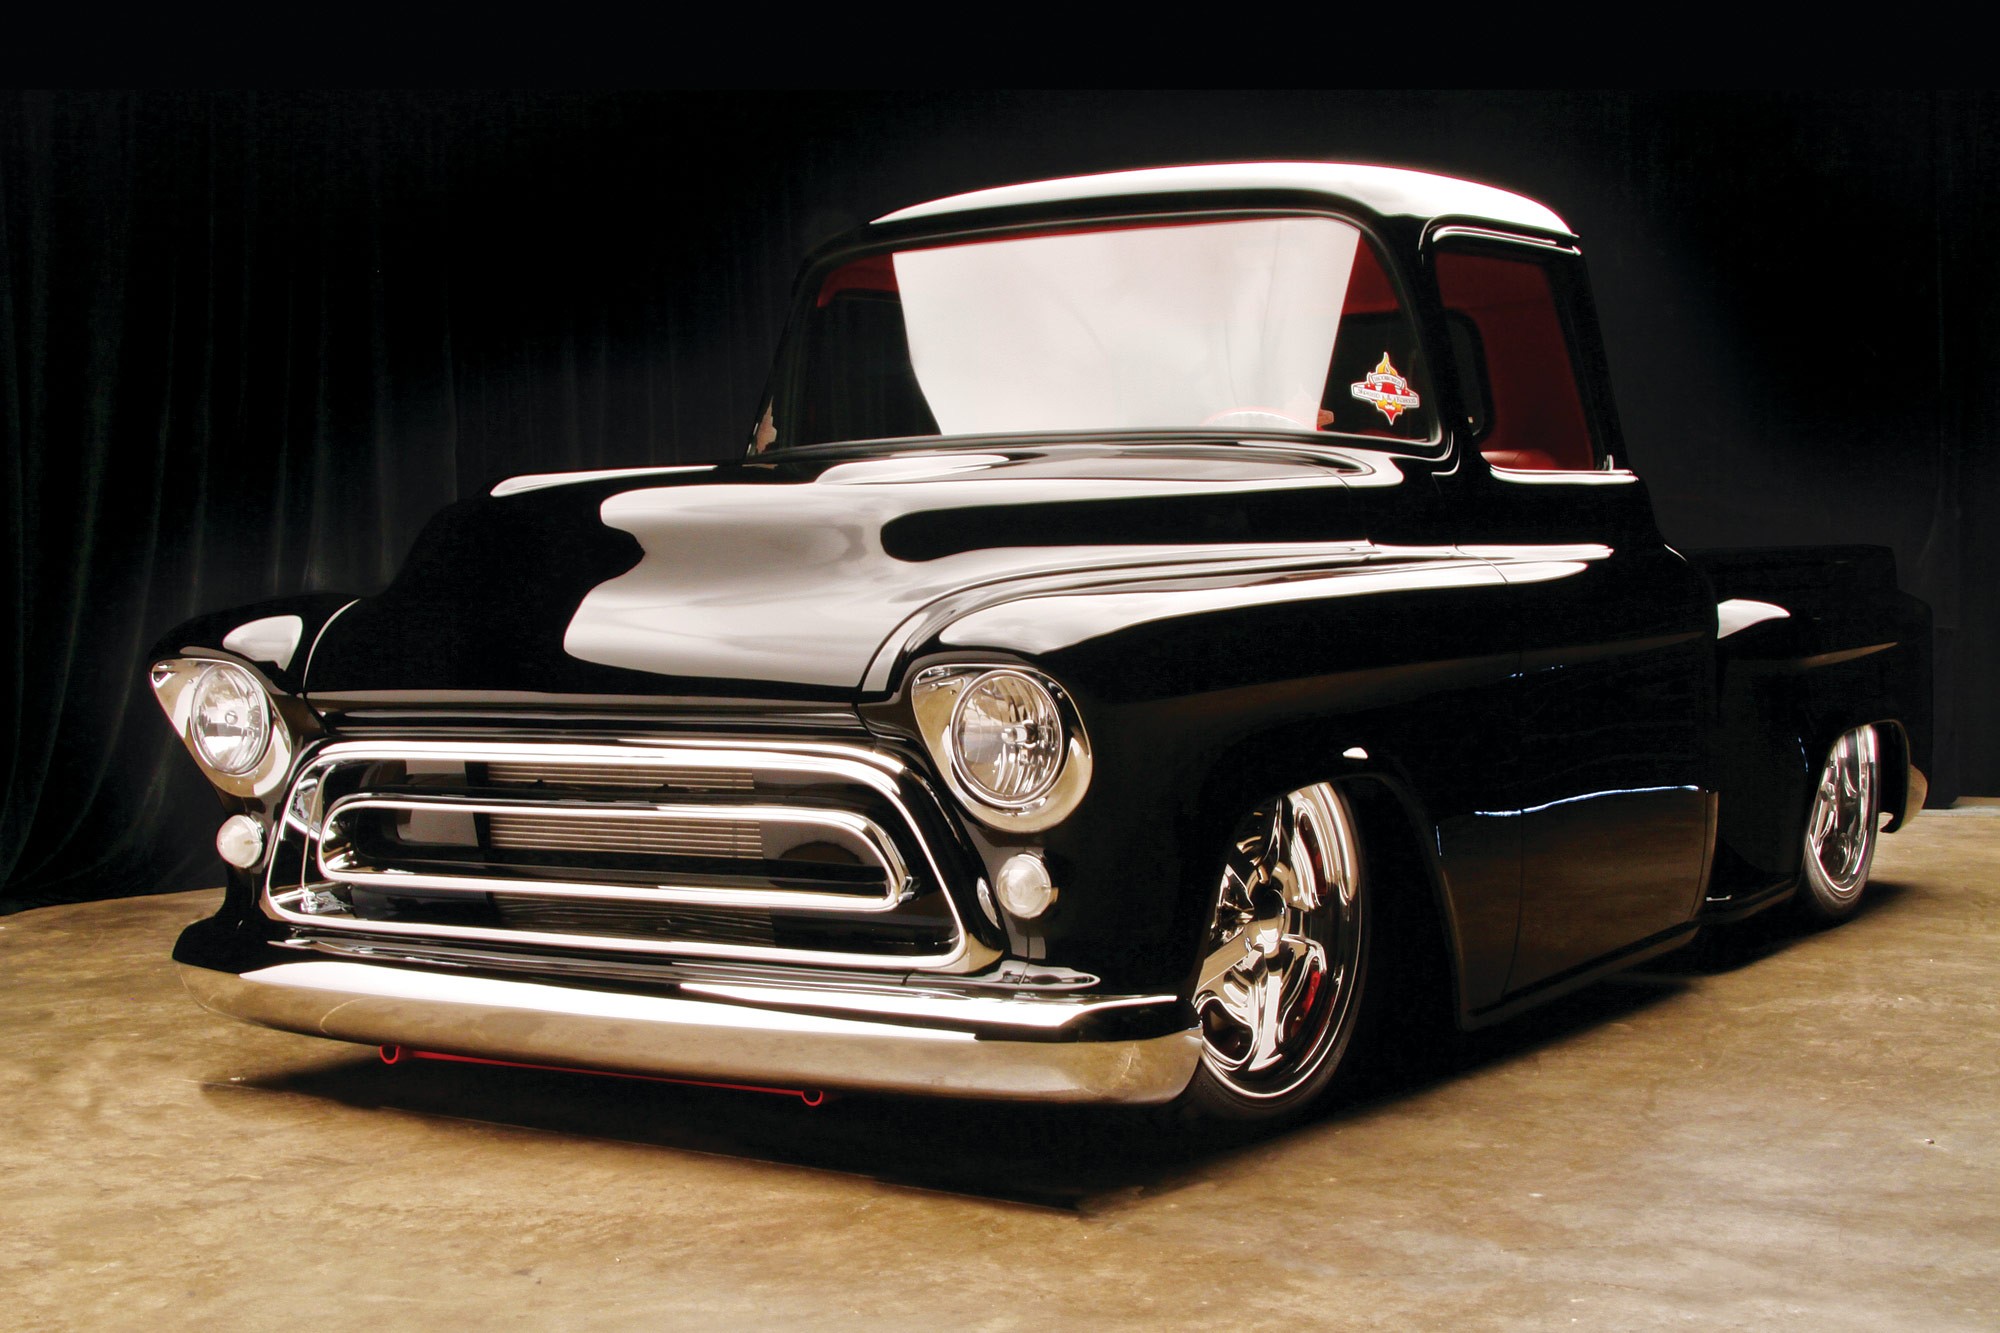 Hd Auto Images, Motor, Engines, Modify, Car Wallpapers - Chevrolet Pick Up 1950 , HD Wallpaper & Backgrounds